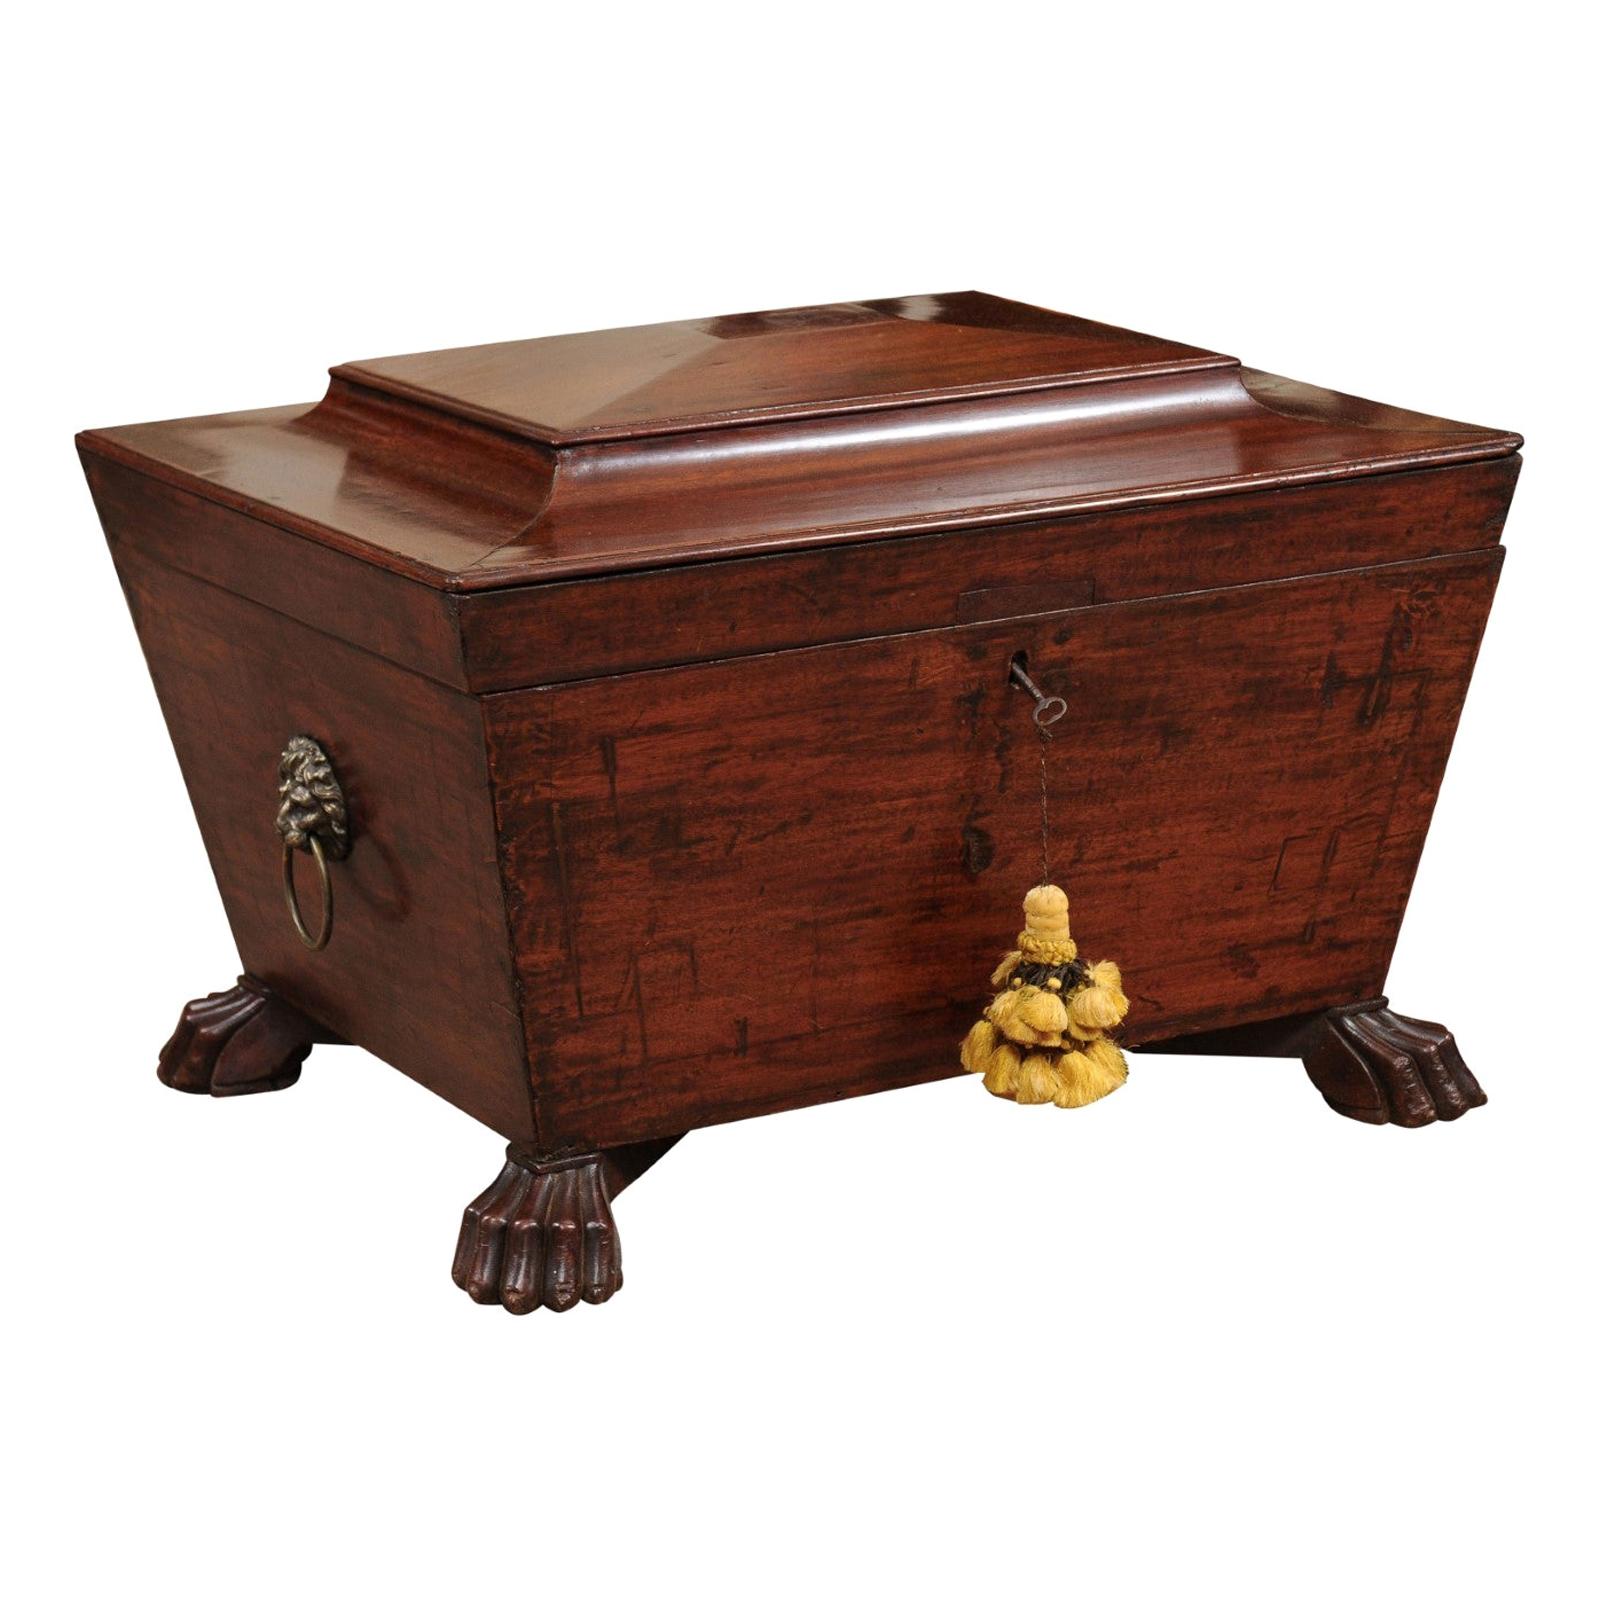 19th Century English Regency Sarcophagus-Form Cellarette in Mahogany For Sale